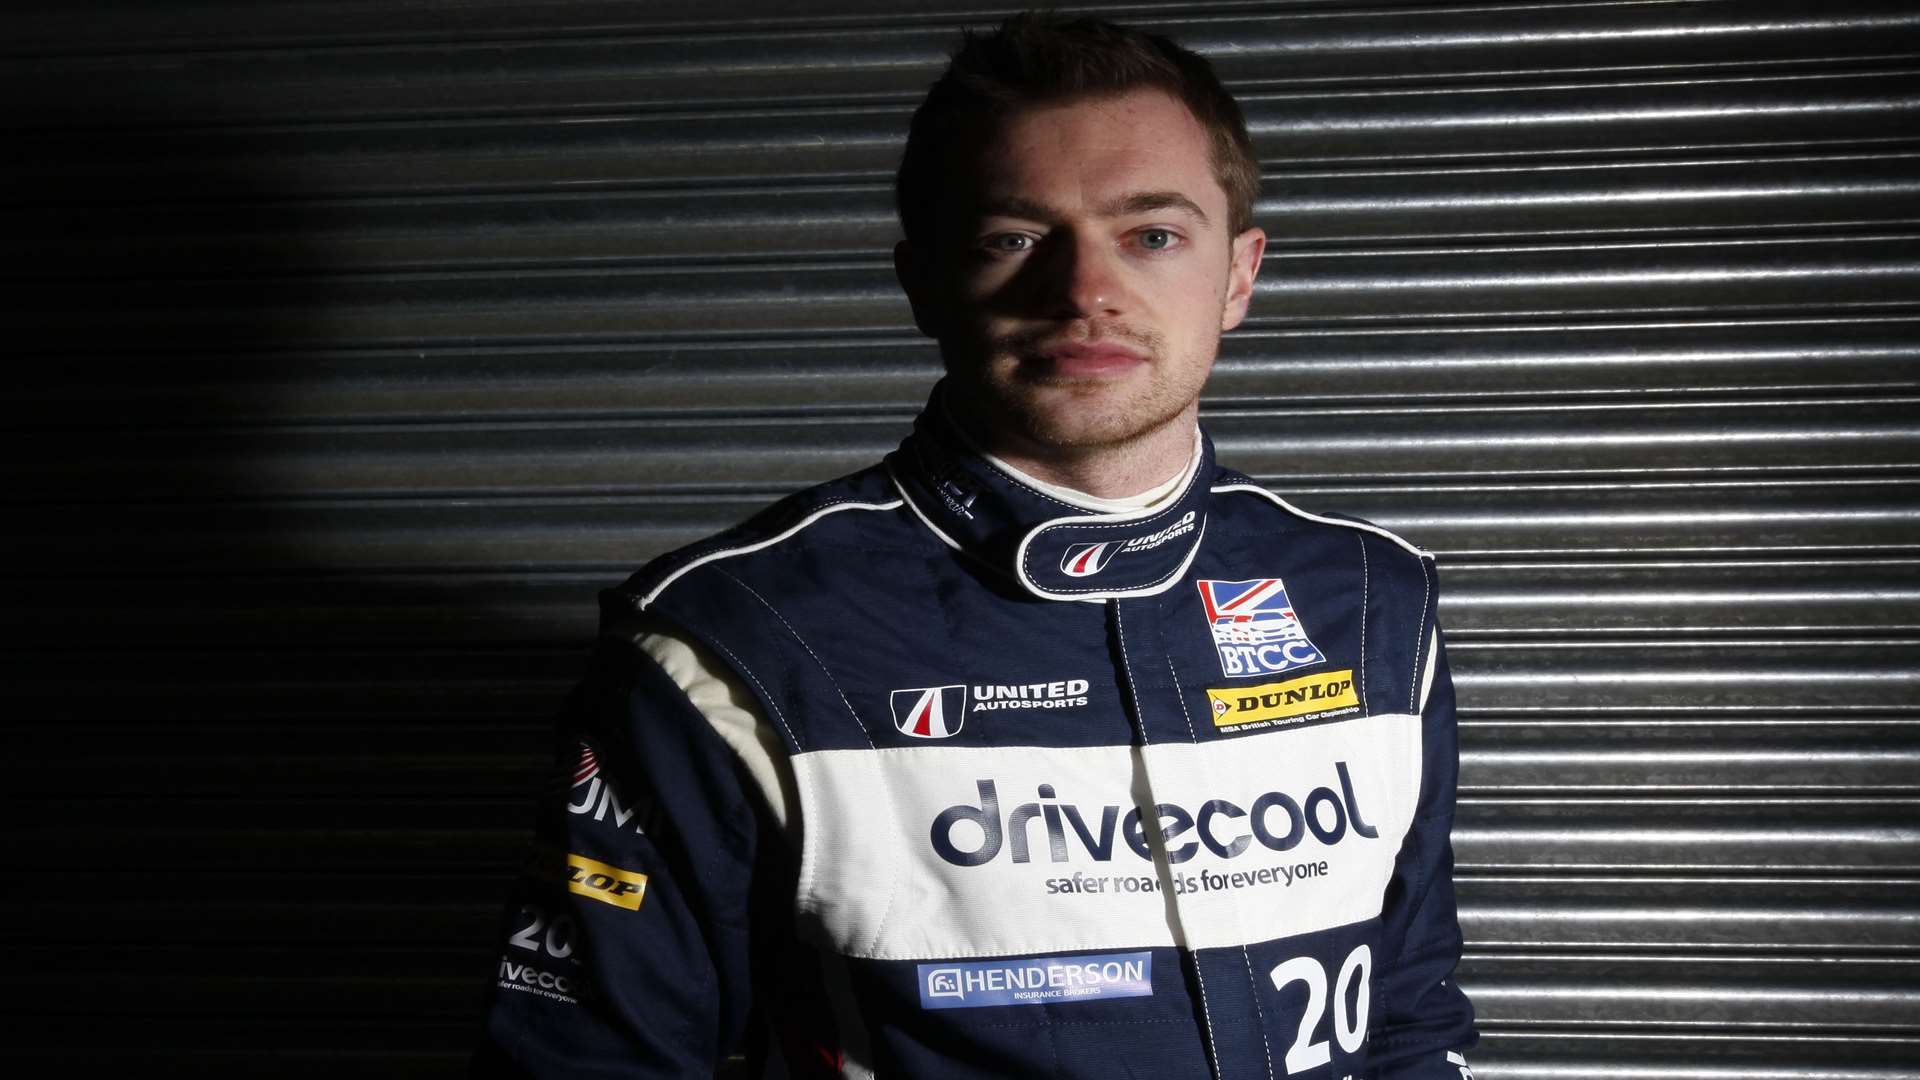 Touring car racer James Cole will take centre stage in Classic Rock